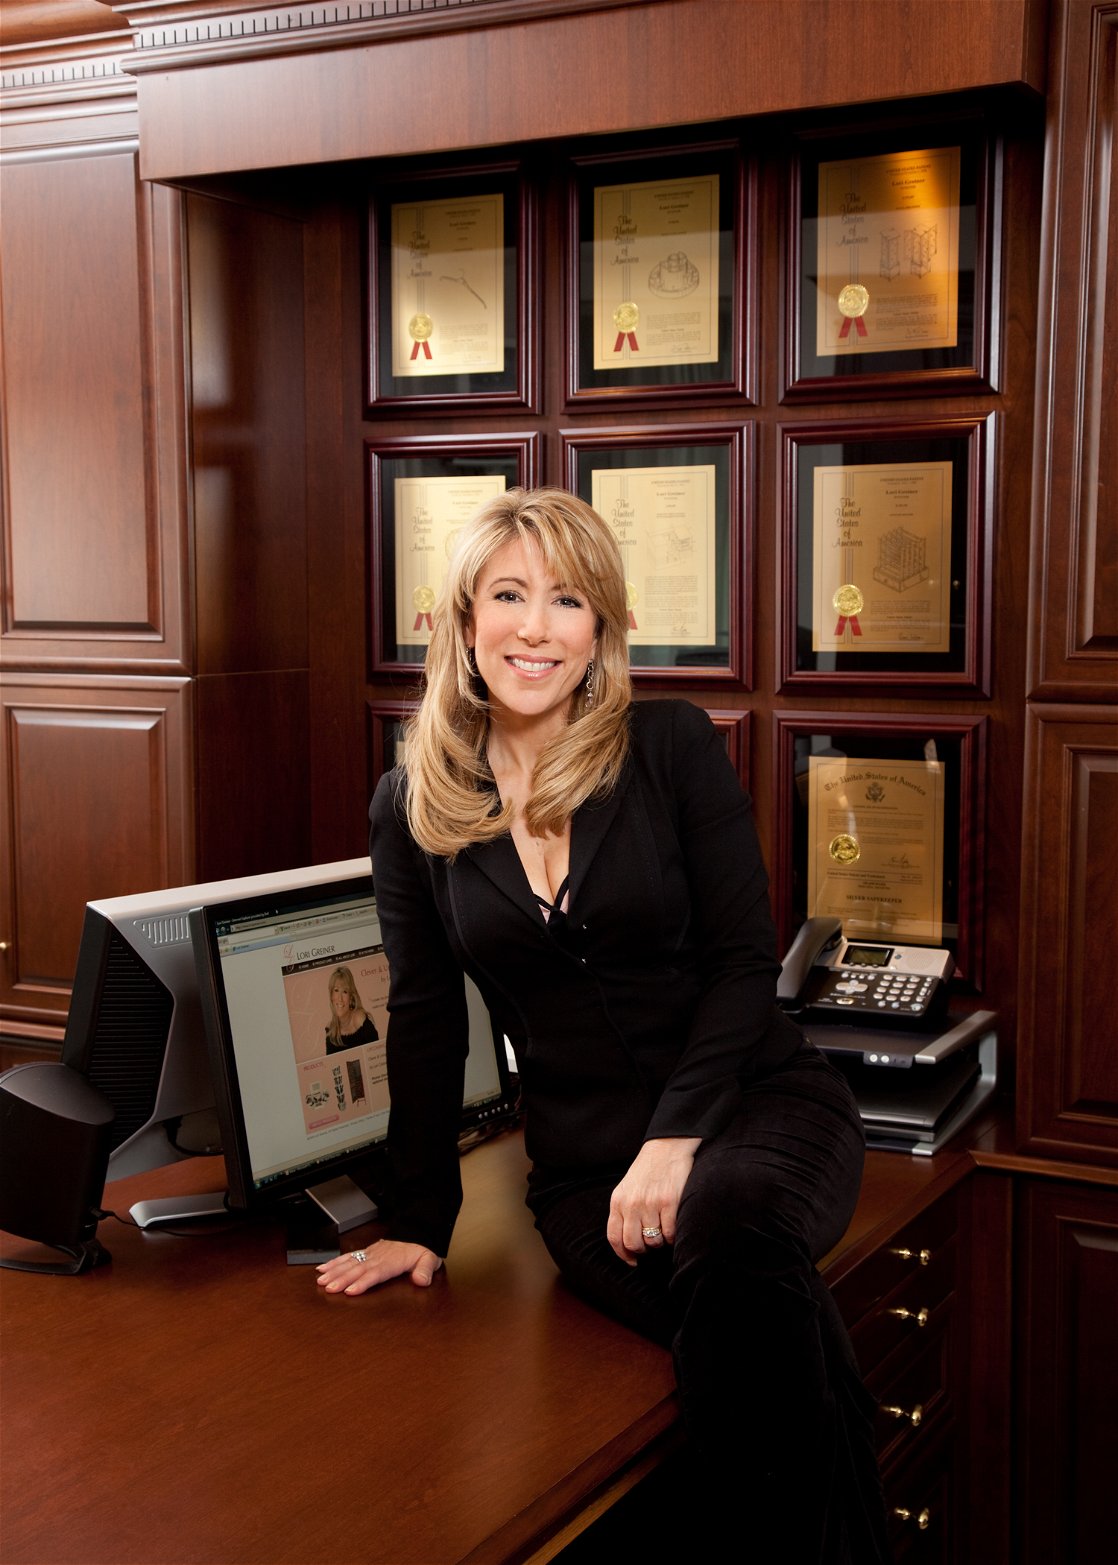 Pictures Of Lori Greiner's House